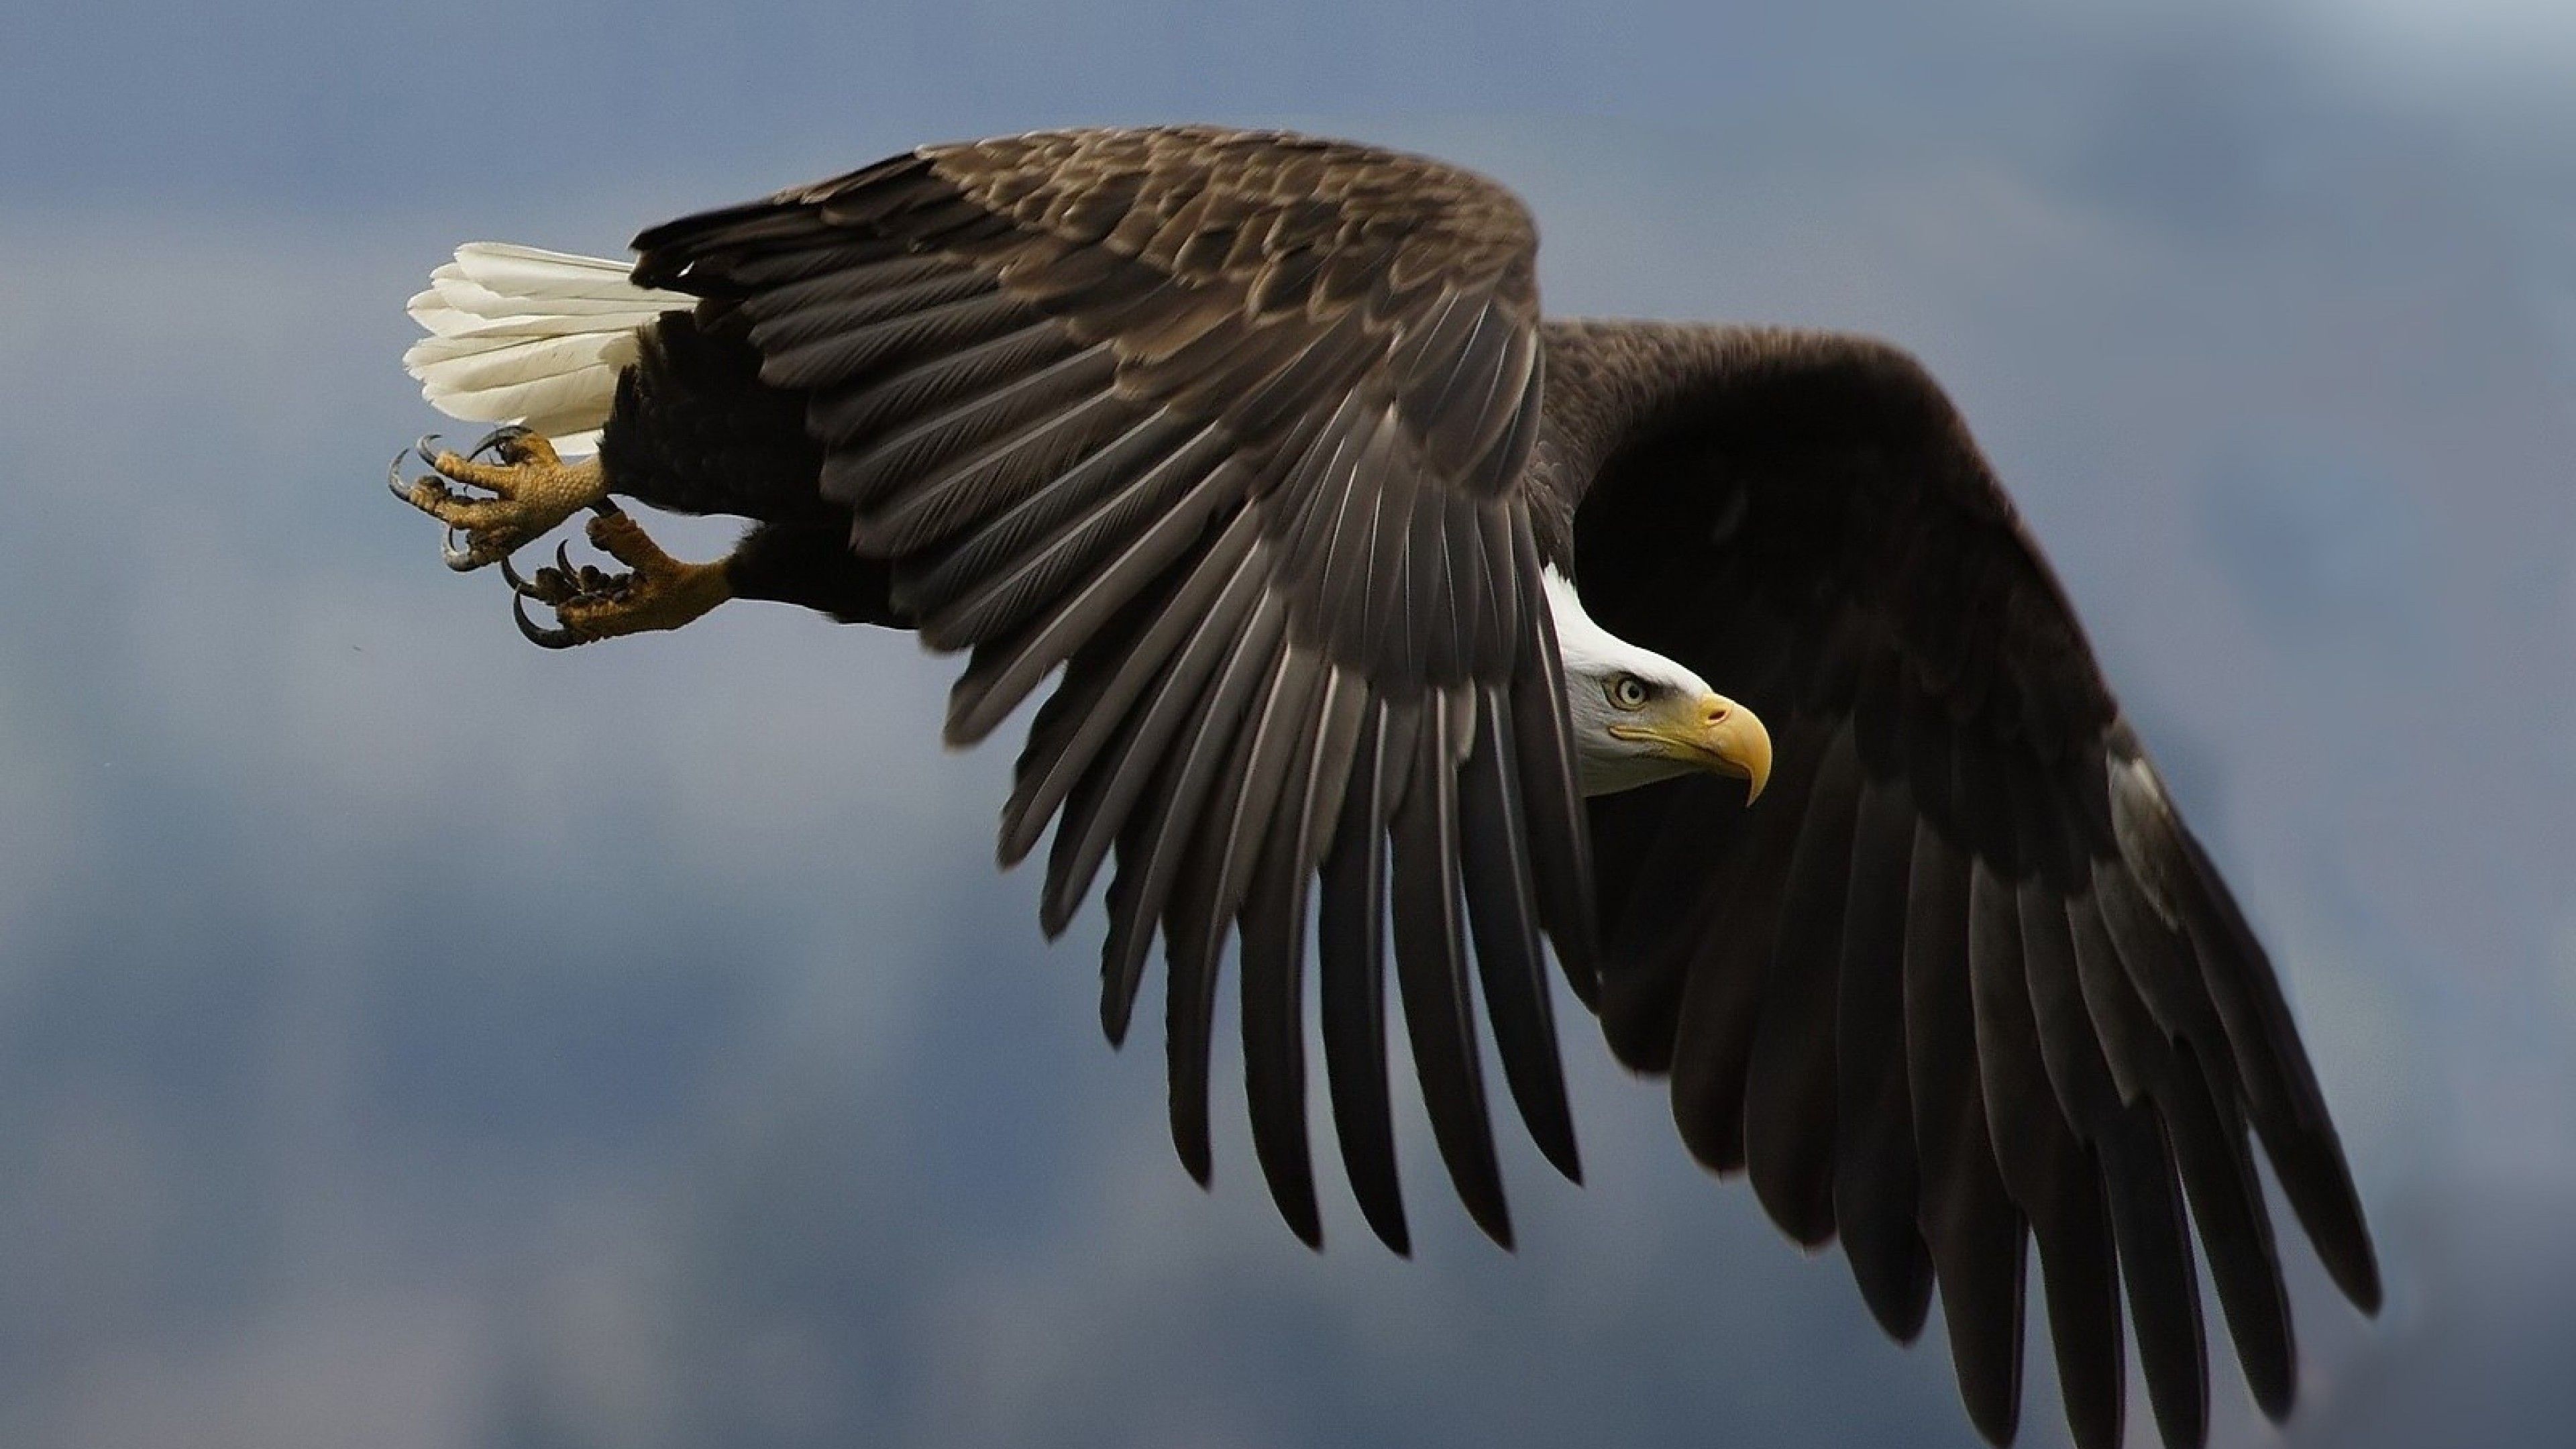 Download 3840x2160 Eagle, Flying, Feathers, Birds, Bald Wallpaper for UHD TV